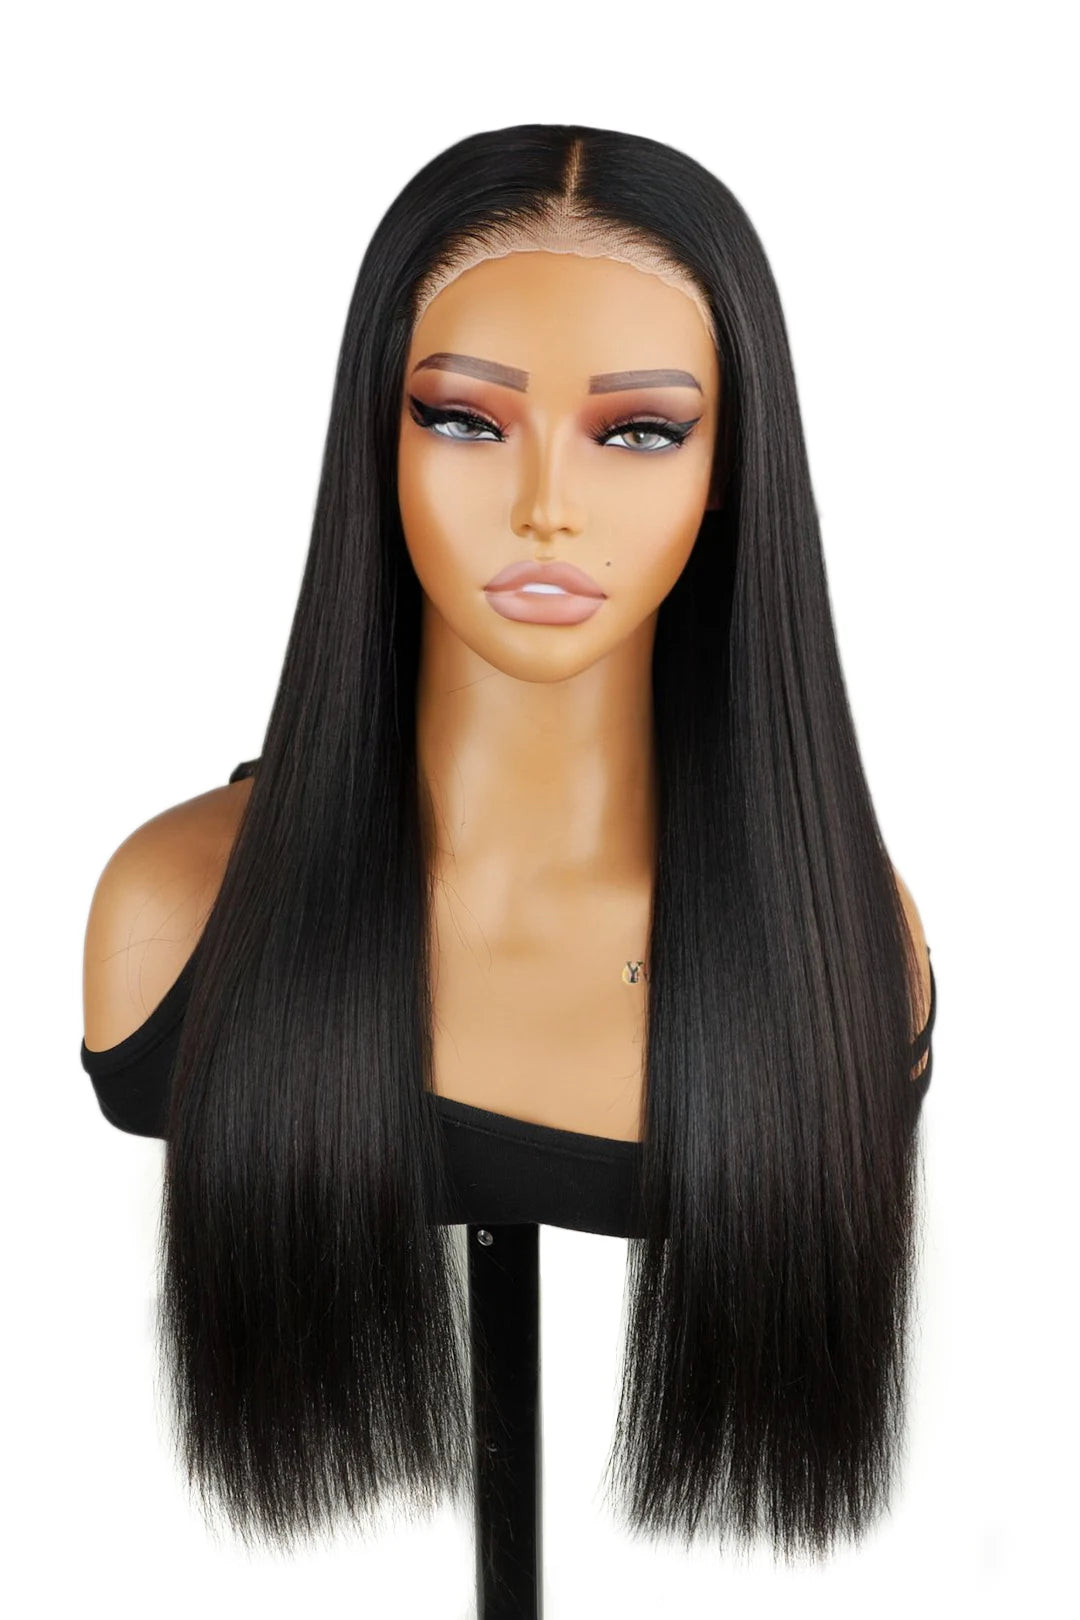 Wear and Go 6x5 Lace Frontal Wig Straight Human Hair Natural Black